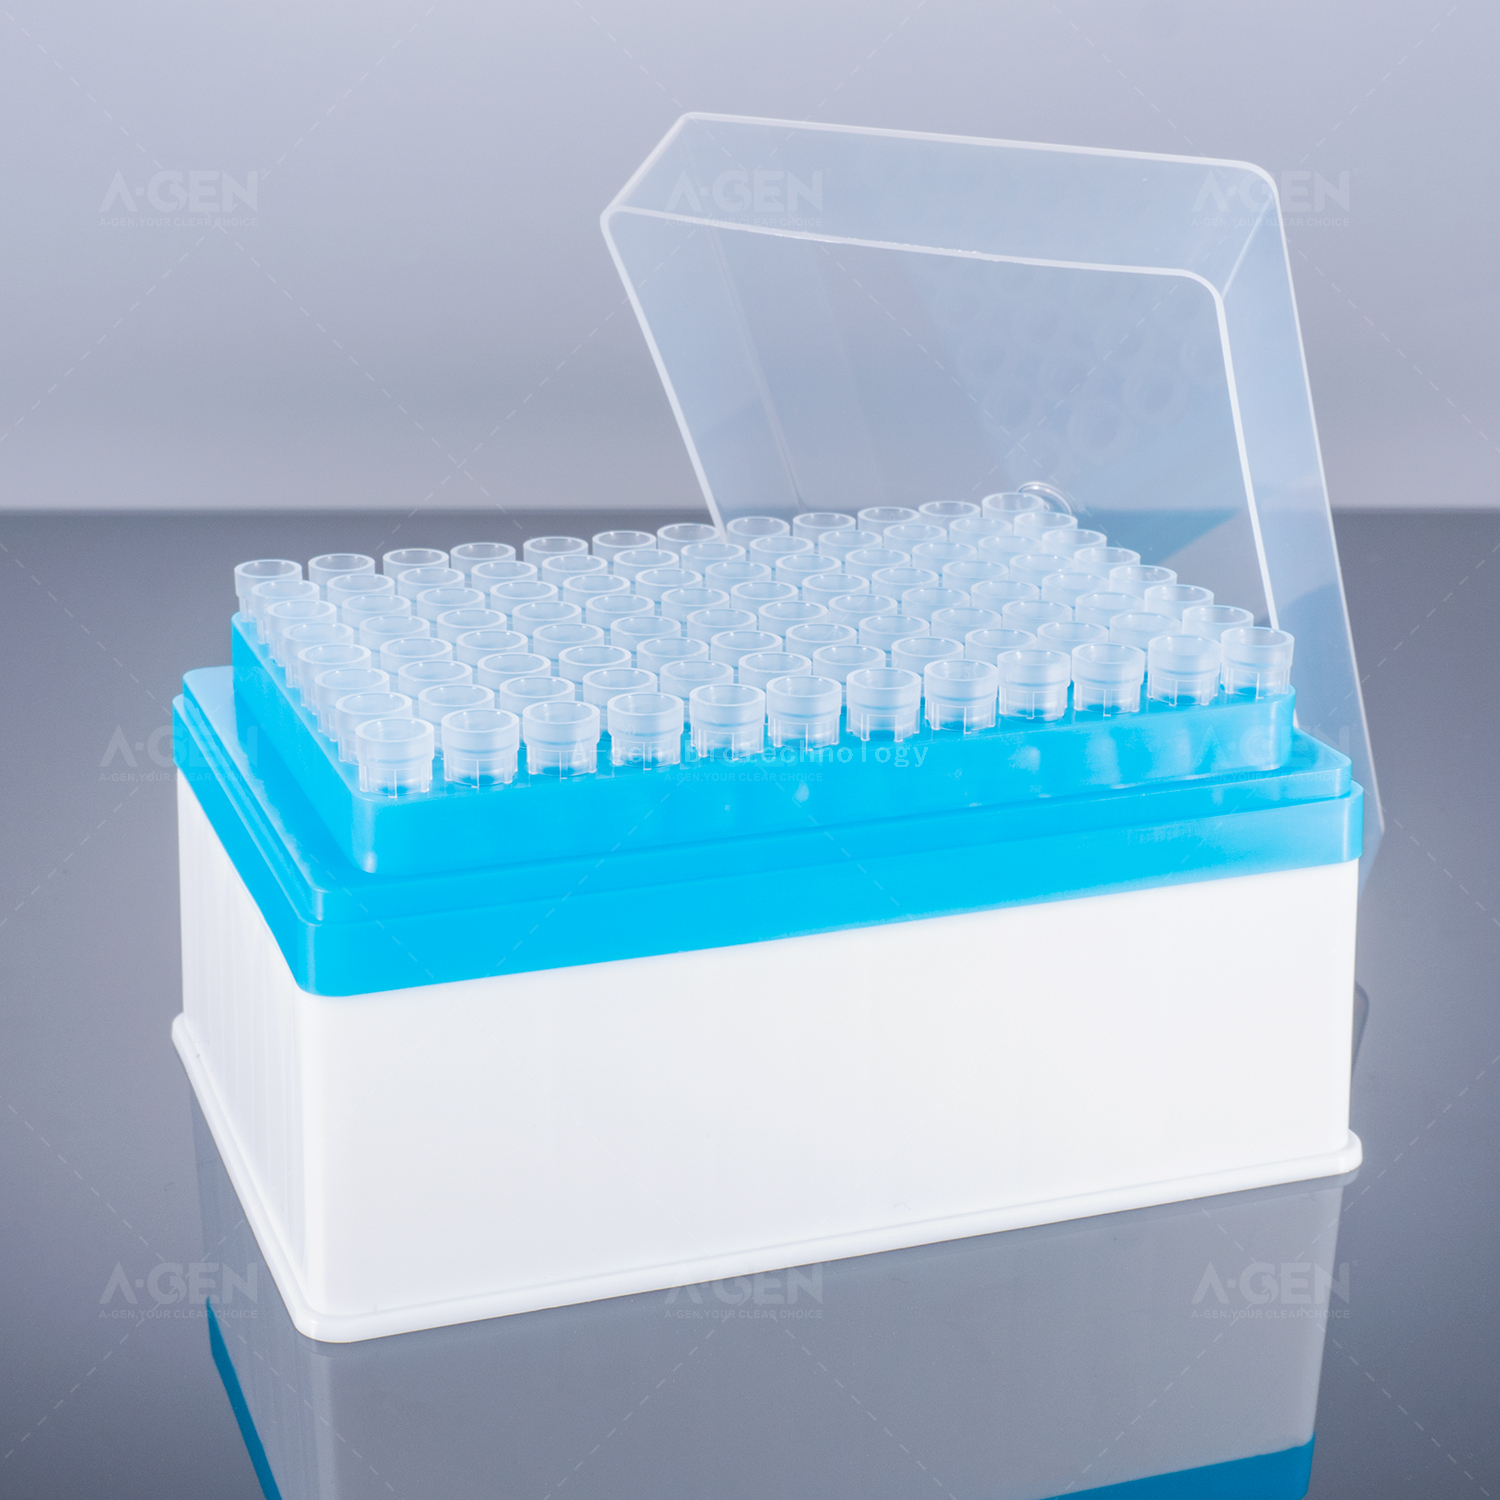 Tecan LiHa 50μL Transparent PP Pipette Tip (SBS Racked,sterilized) for Liquid Transfer With Filter TTF-50-RSL Low Retention